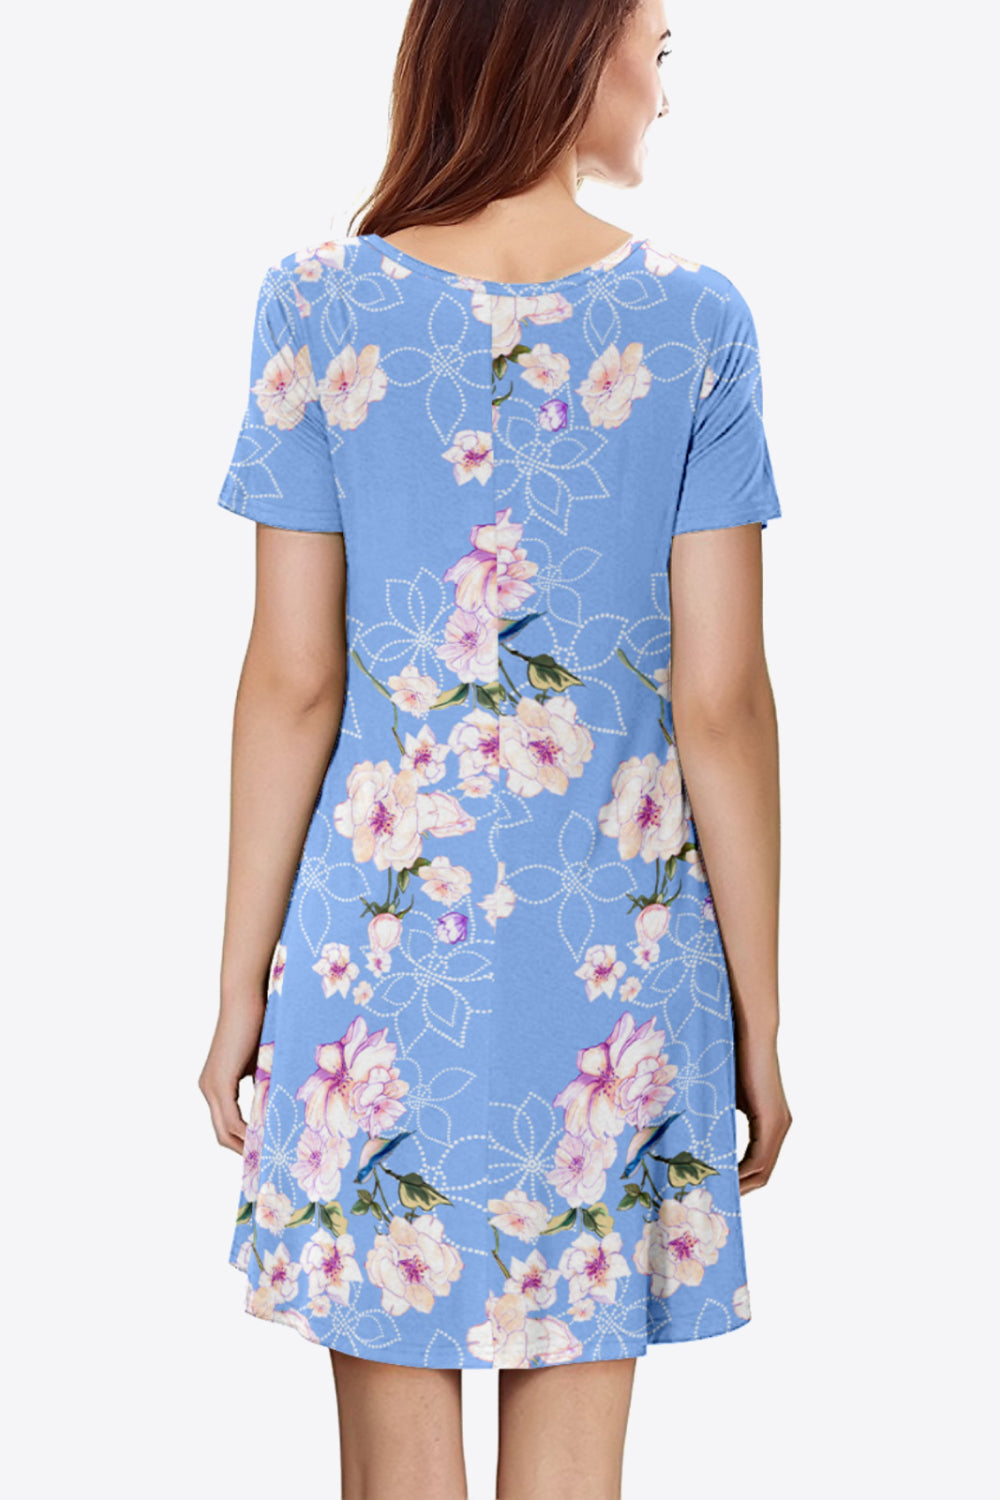 Summer Floral Round Neck Short Sleeve Dress: Perfect for Beach Weddings & Women's Party Wear